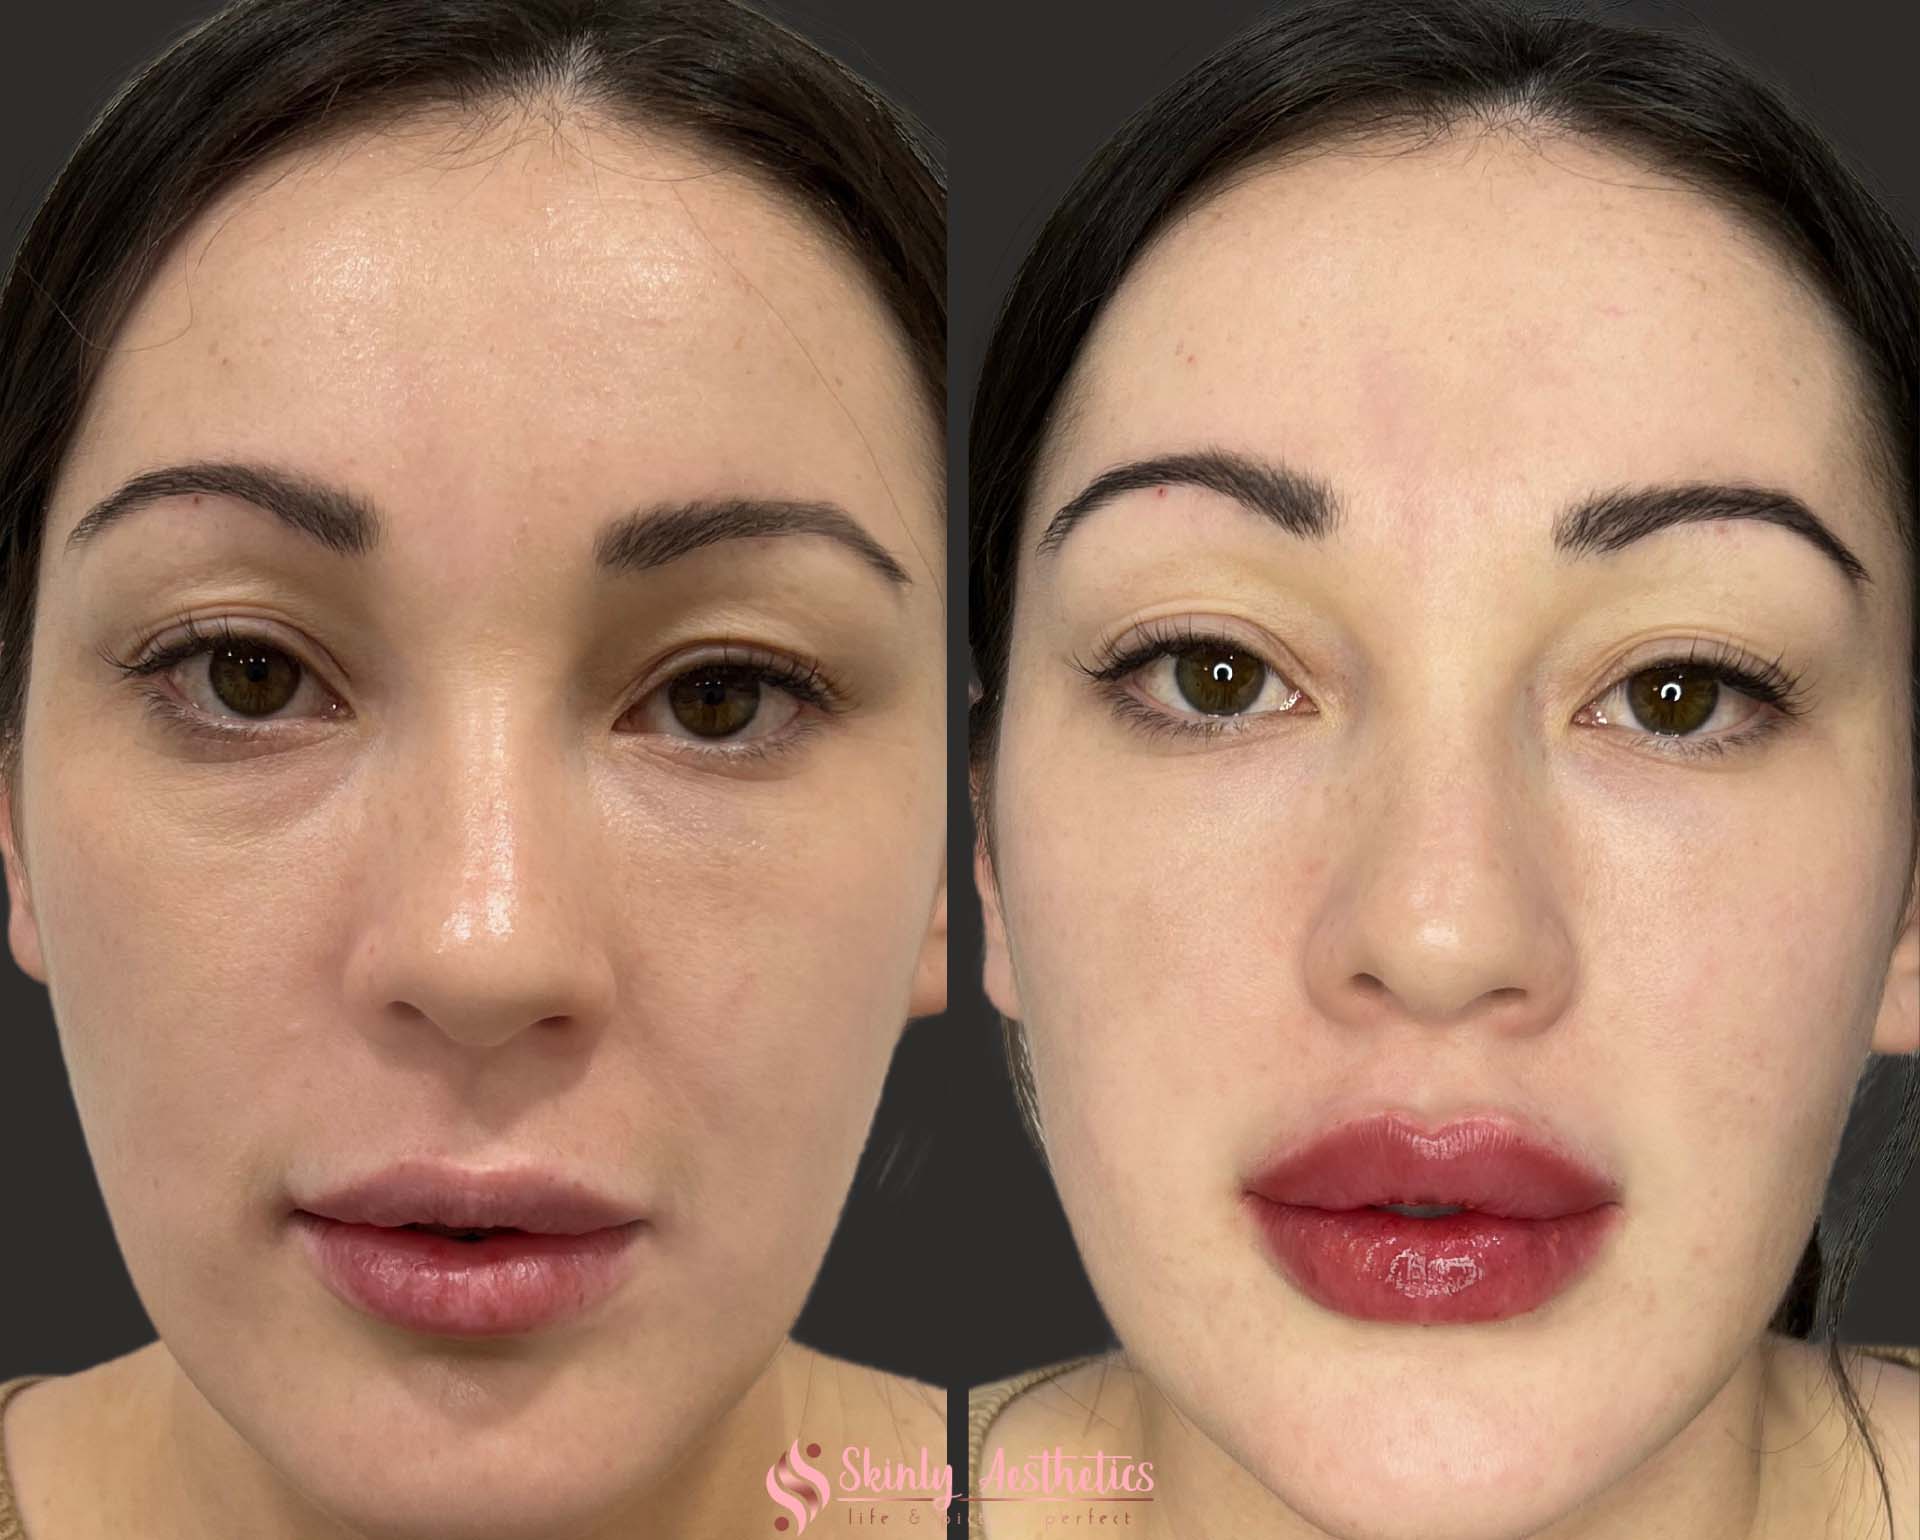 before and after results following the Russian lips filler technique with Juvederm Ultra